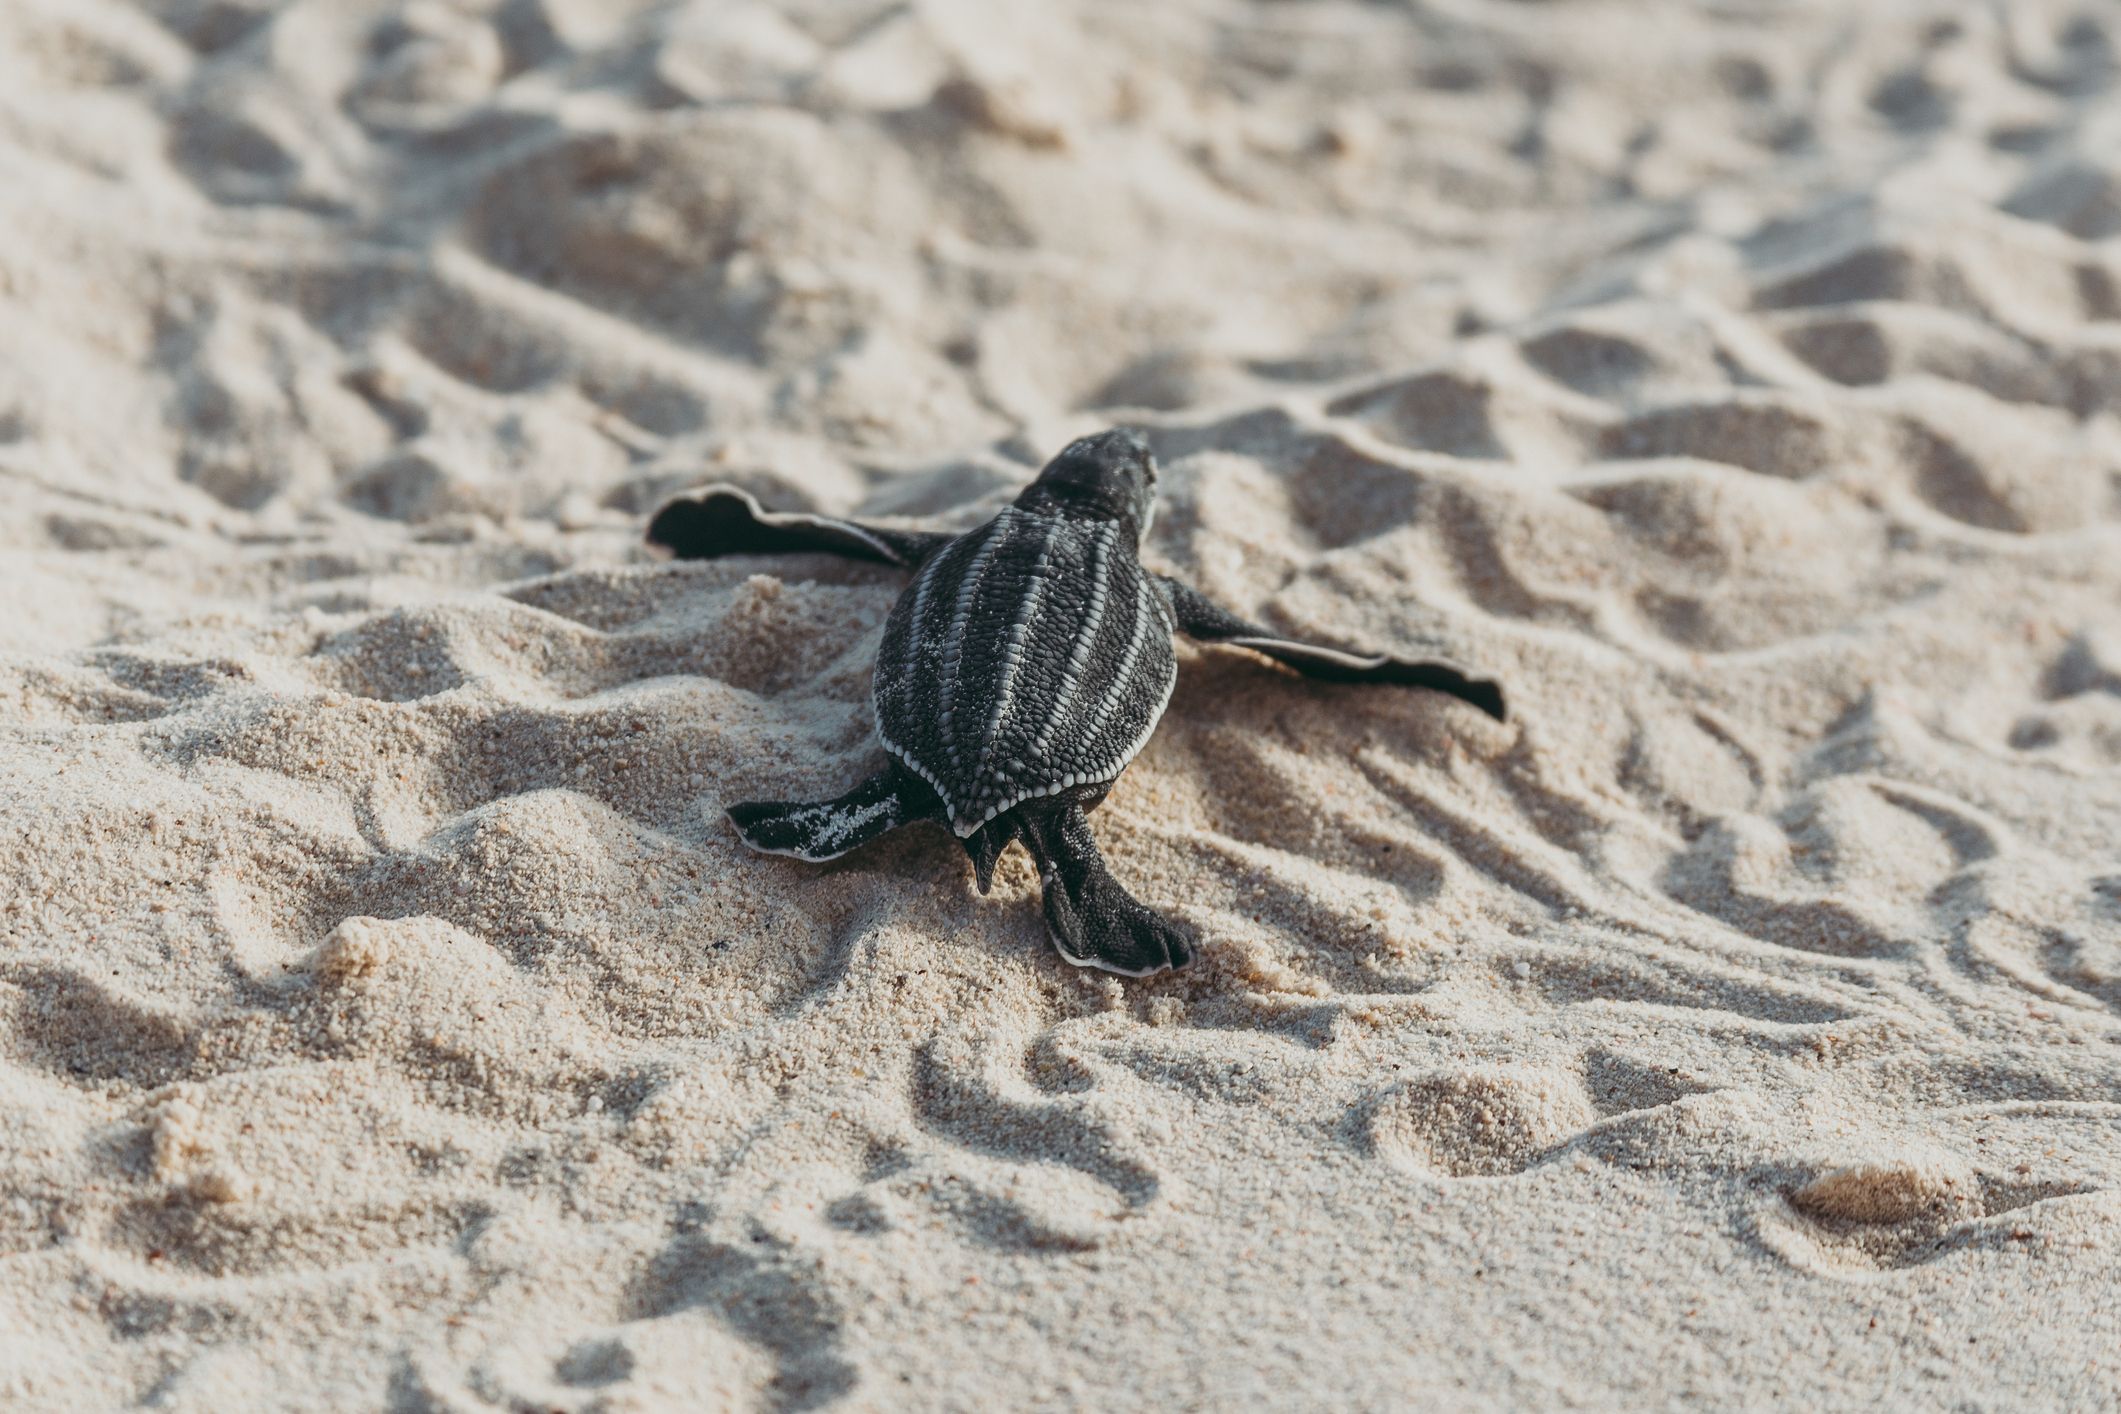 A baby turtle on the sand - Sea turtle